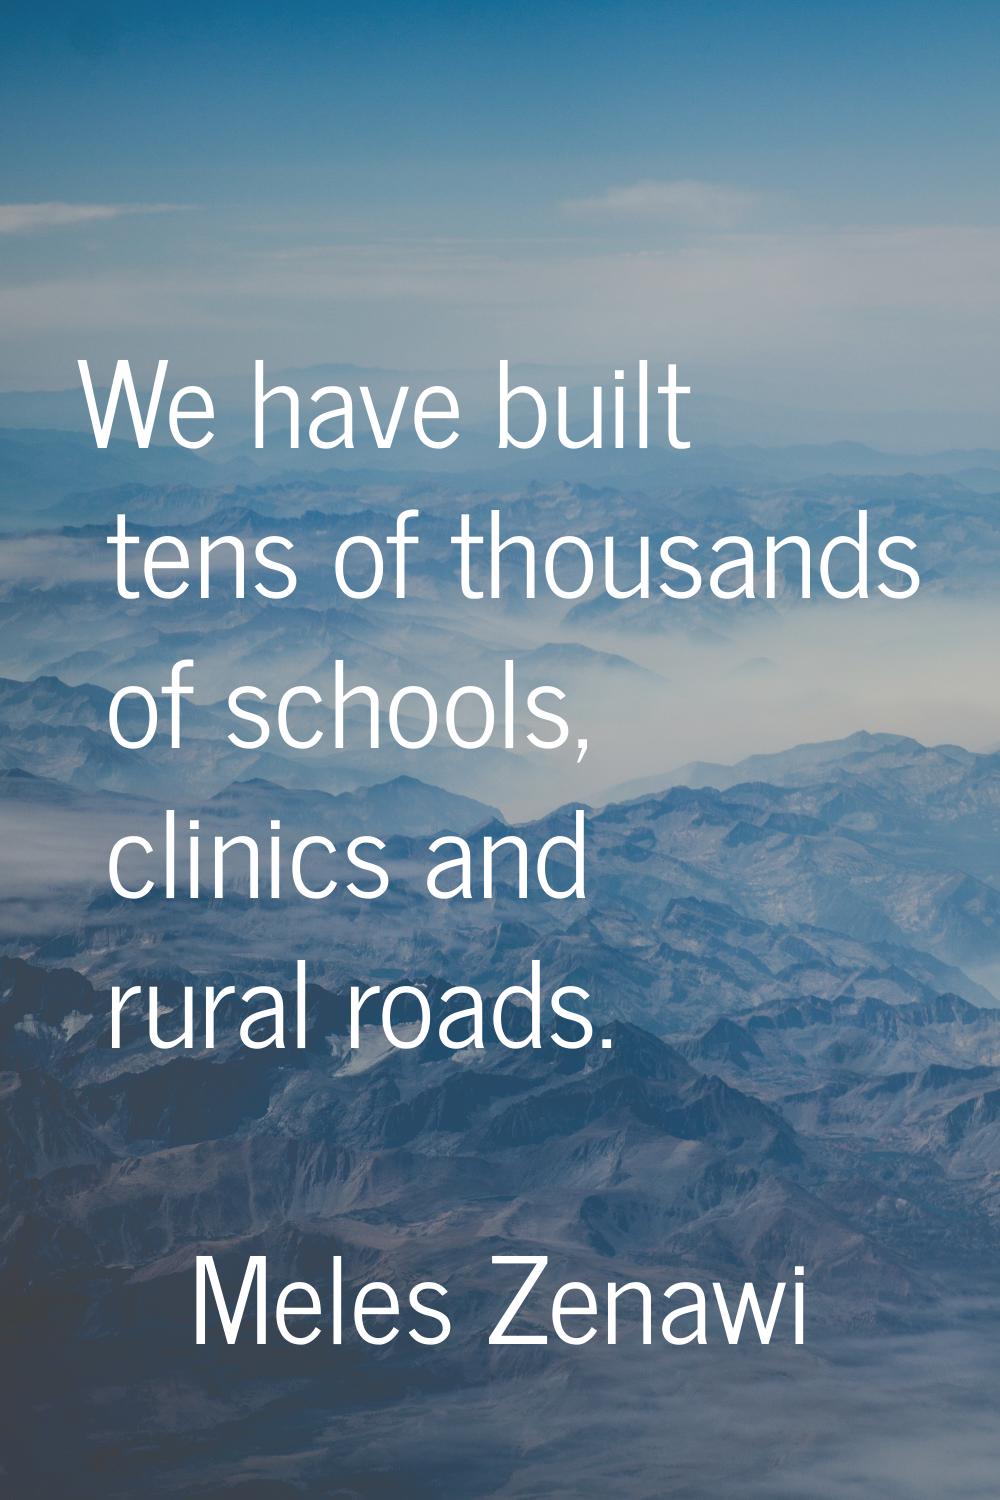 We have built tens of thousands of schools, clinics and rural roads.